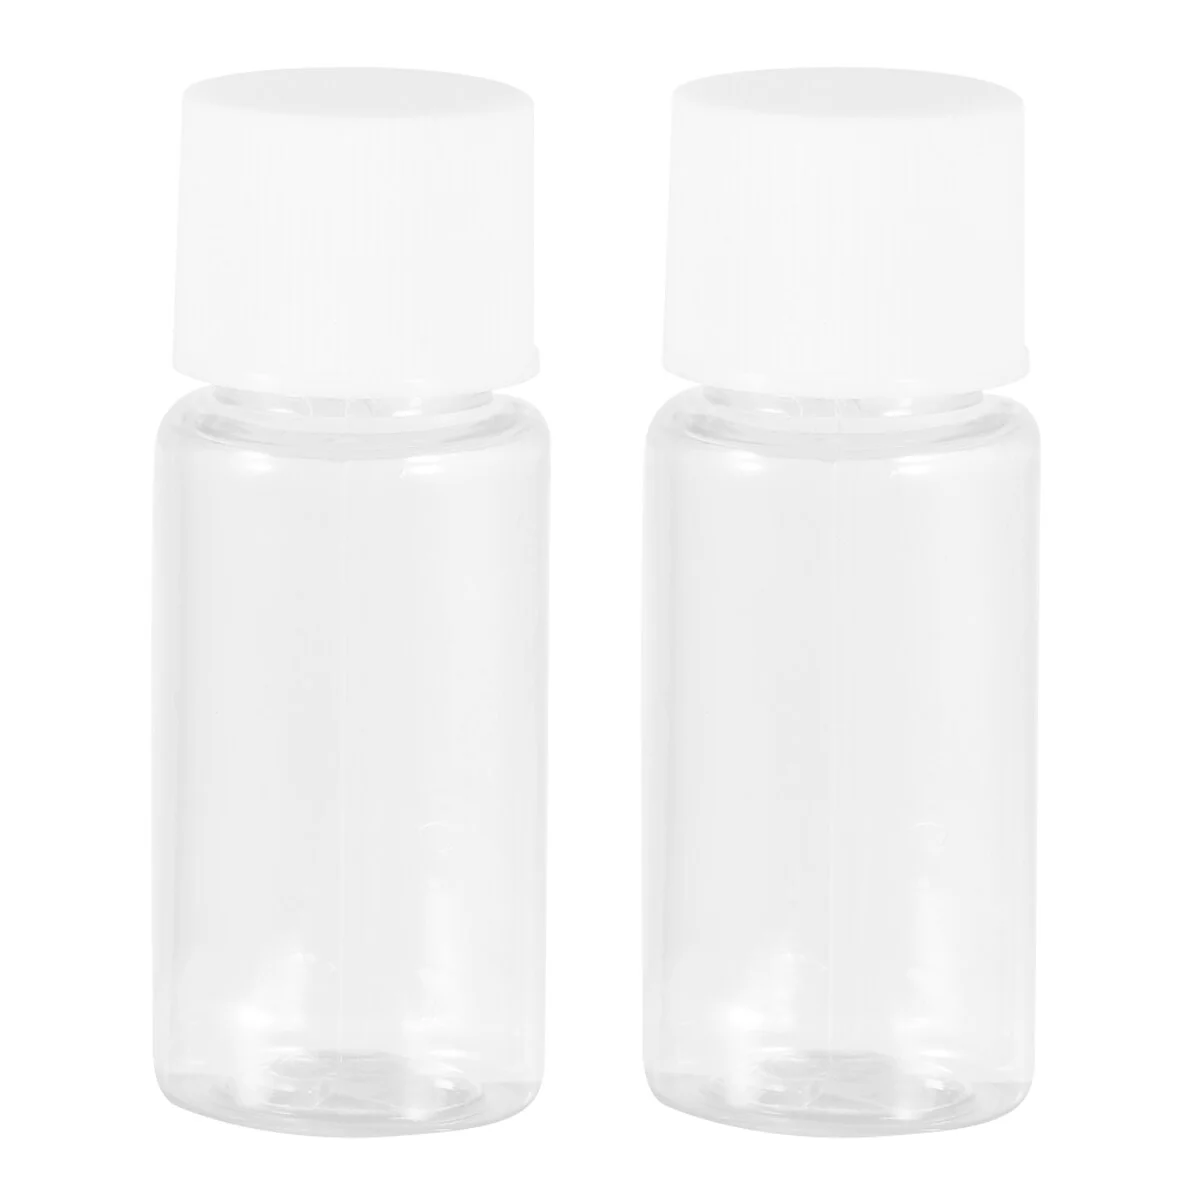 

Empty Bottles, 25pcs Portable Travel Comestic Bottles Refillable Small Storage Containers for Shampoo Lotion ( 10ml )